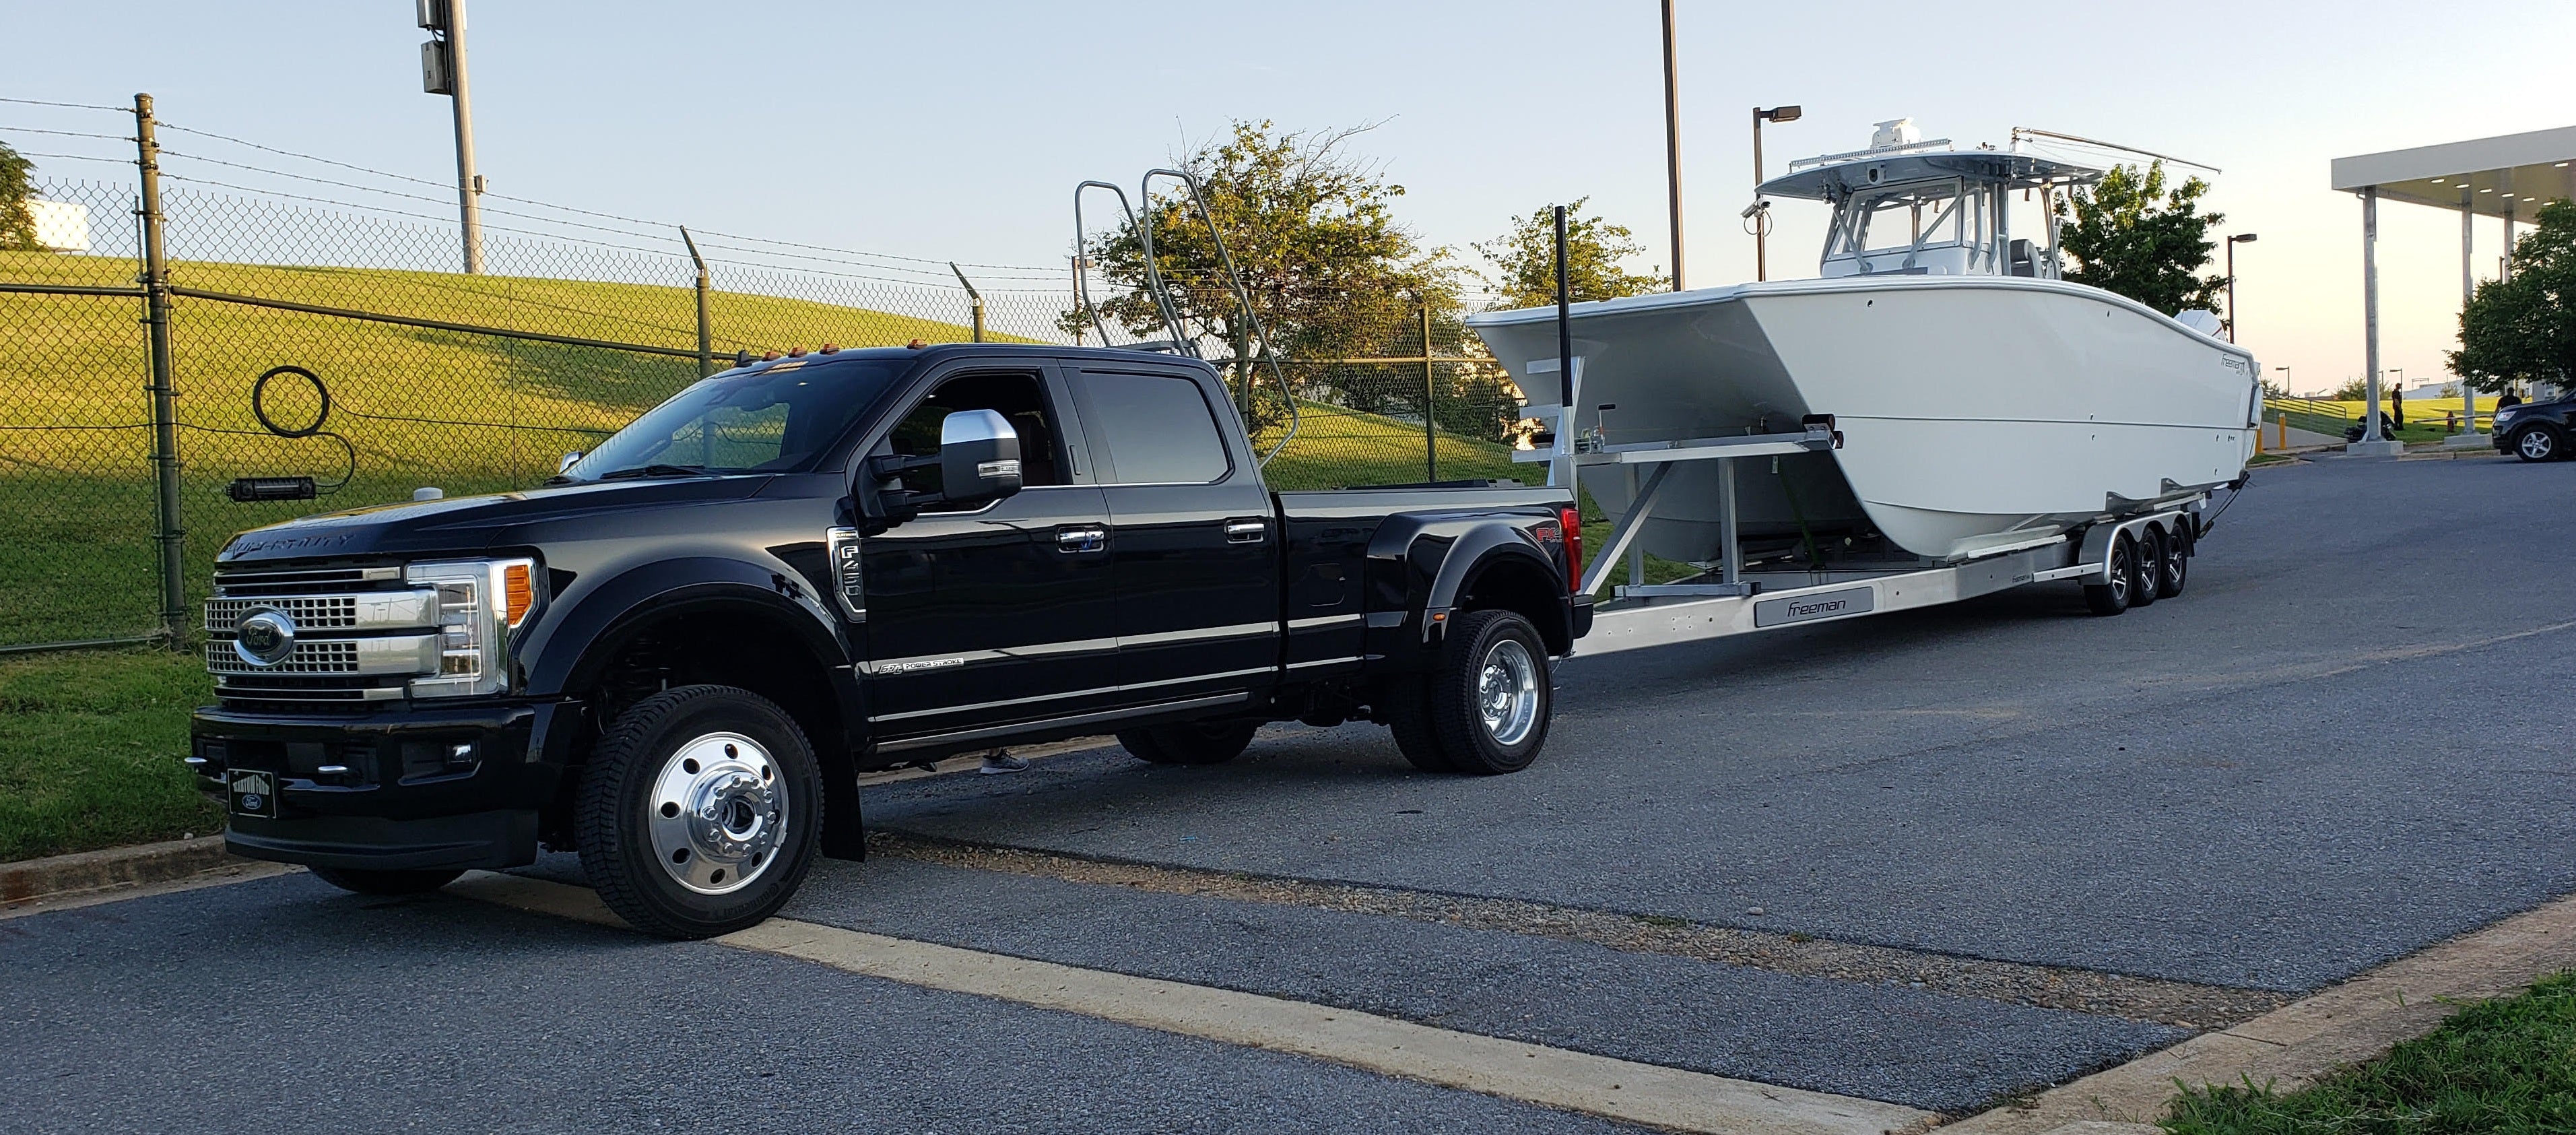 BulletProof Hitches - Top 5 Towing Mistakes